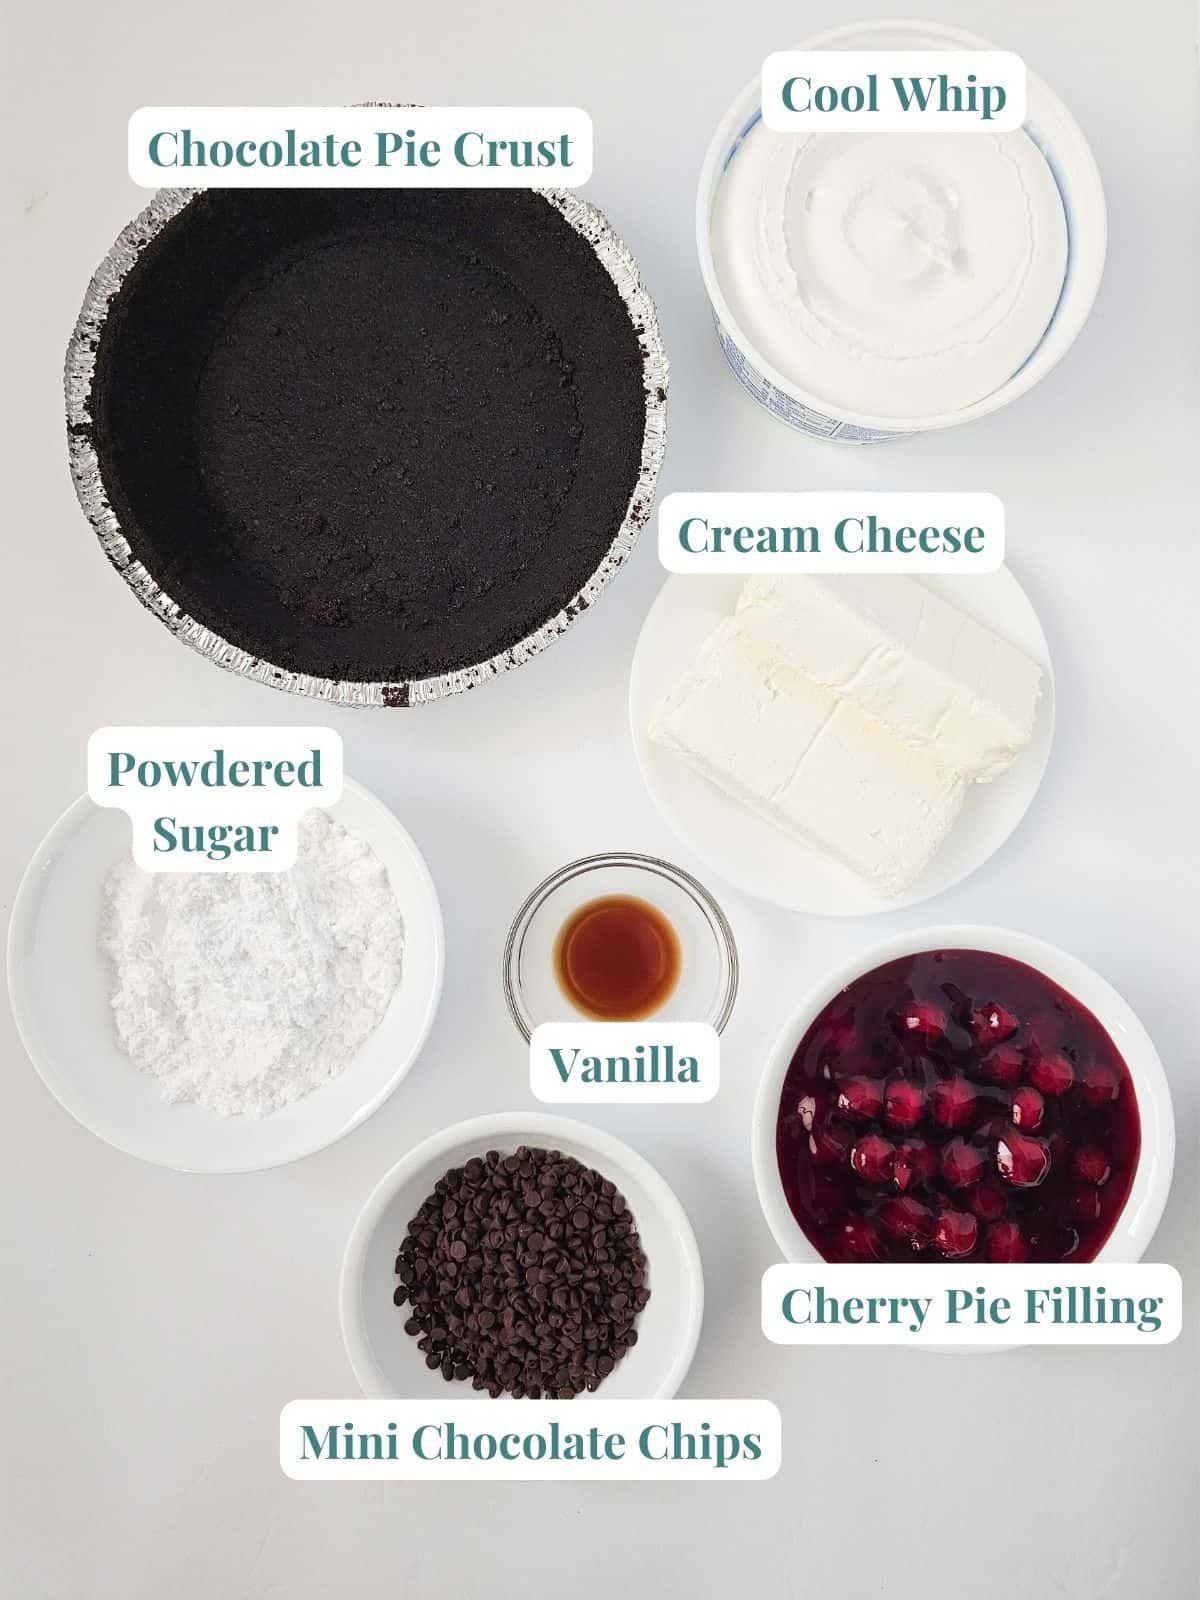 No Bake Chocolate Cherry cheesecake ingredients with Cool Whip.